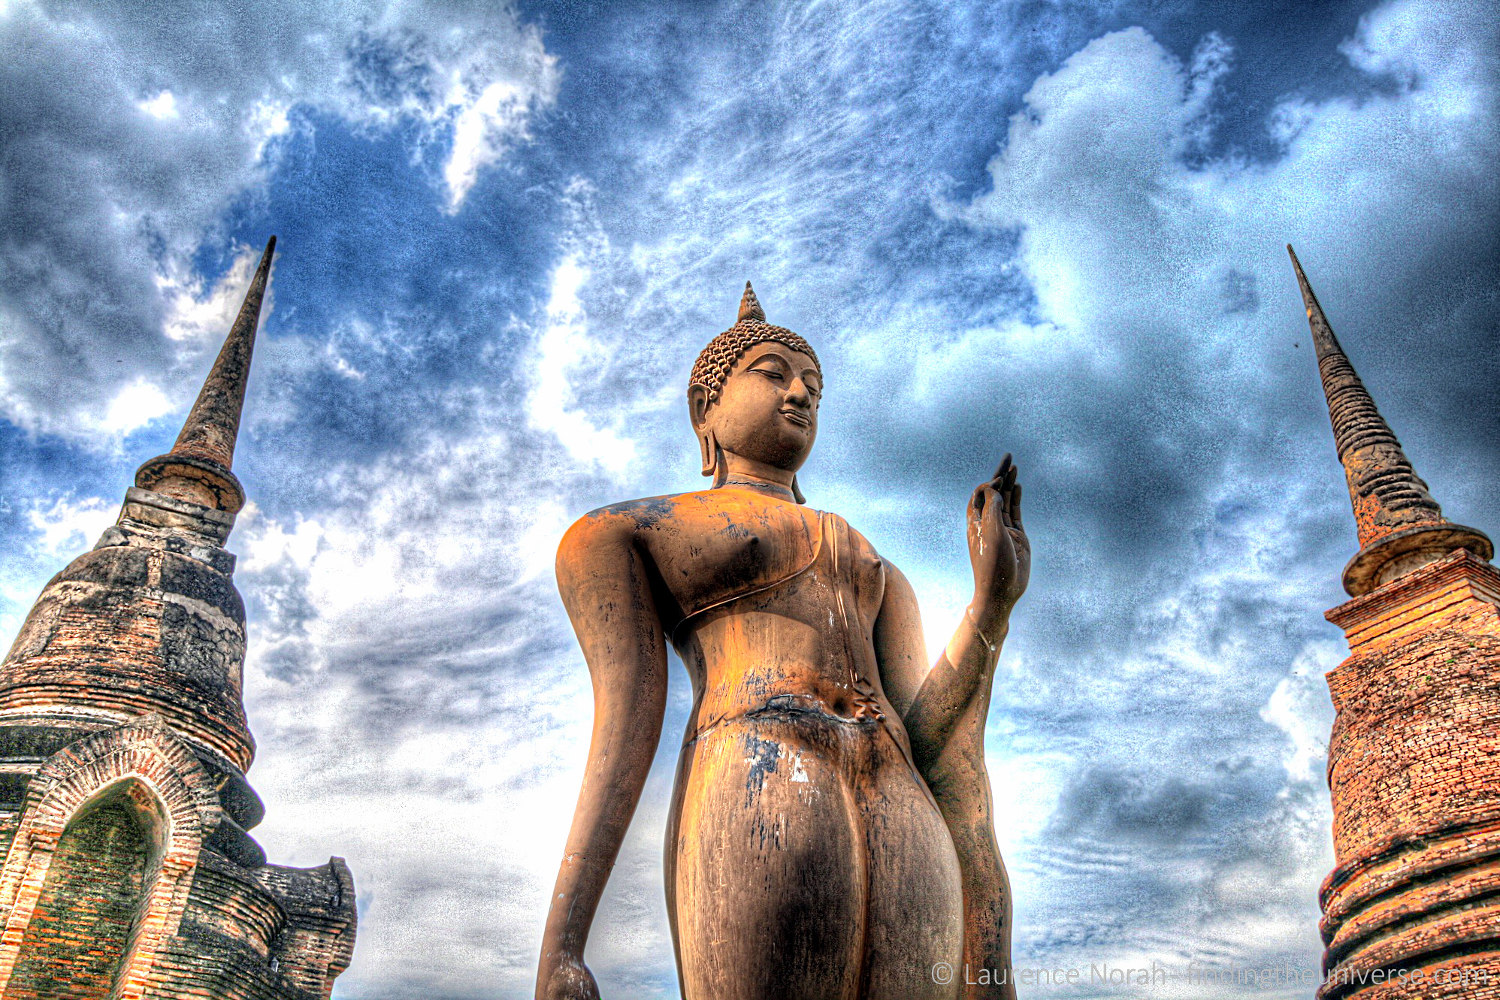 Two wats one statue hdr.jpg